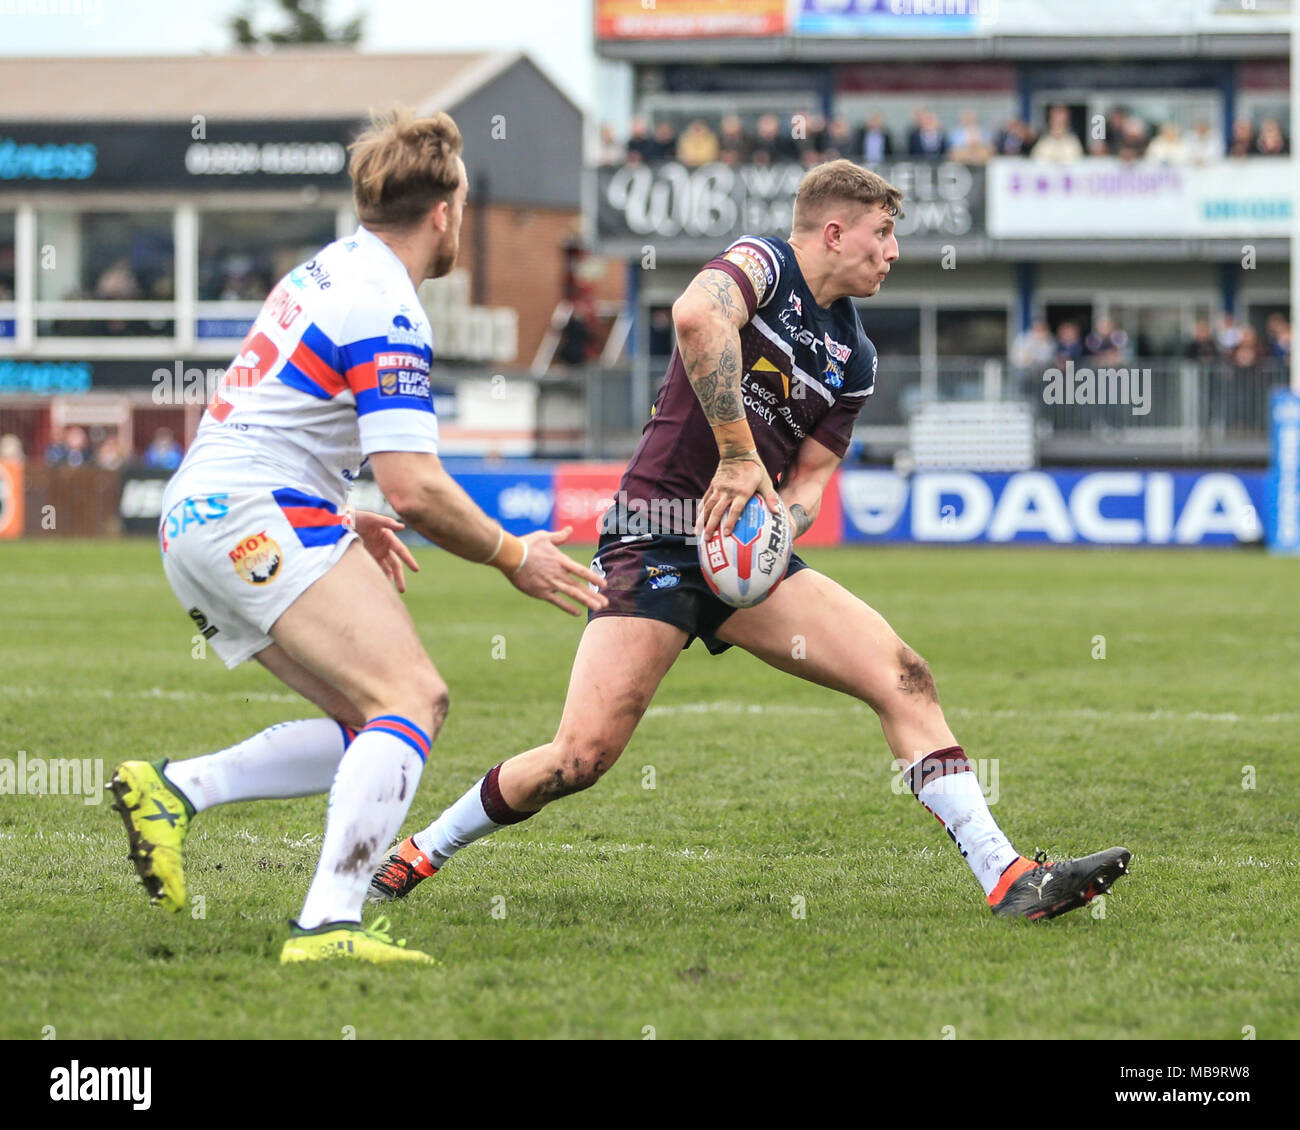 Wakefield, UK. 8th April 2018, Beaumont Legal Stadium, Wakefield, England; Betfred Super League rugby, Wakefield Trinity v Leeds Rhinos; Liam Sutcliffe of Leeds Rhinos passes the ball Credit: News Images/Alamy Live News Stock Photo